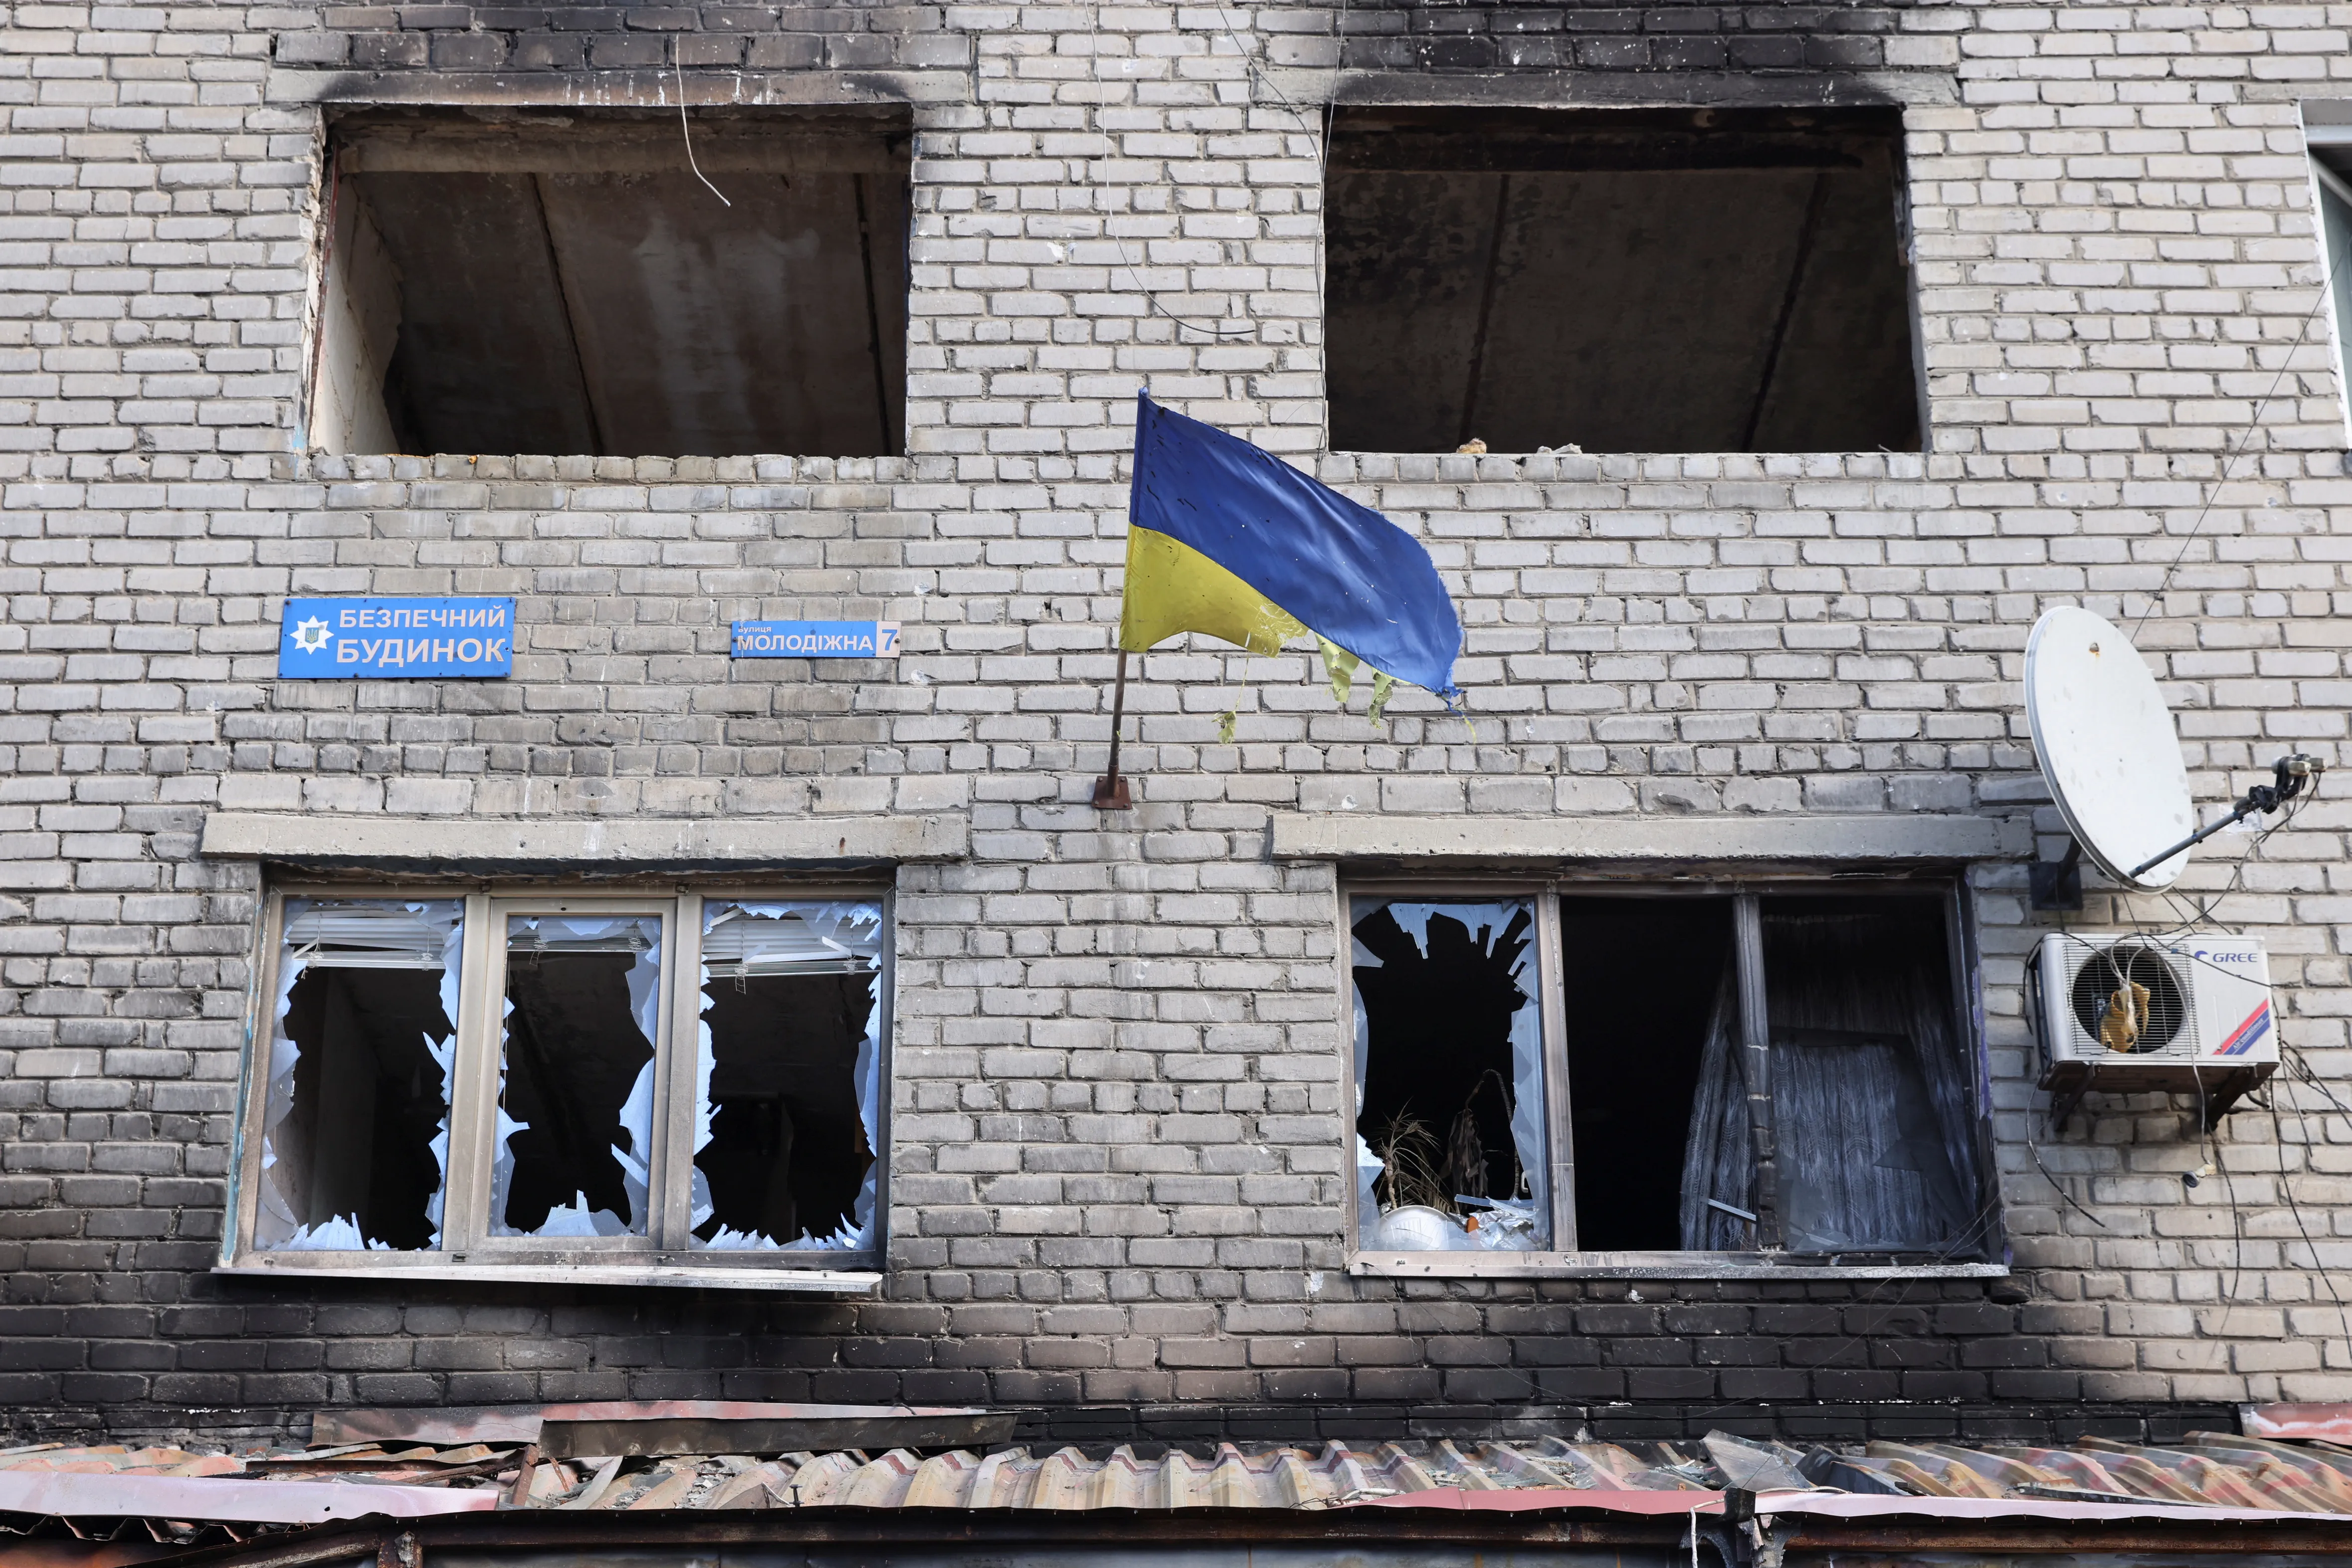 A ragged Ukrainian national flag is seen on a damaged building in the town of Siversk, amid Russia's attack on Ukraine, in Donetsk region, Ukraine February 20, 2023. REUTERS/Yevhen Titov